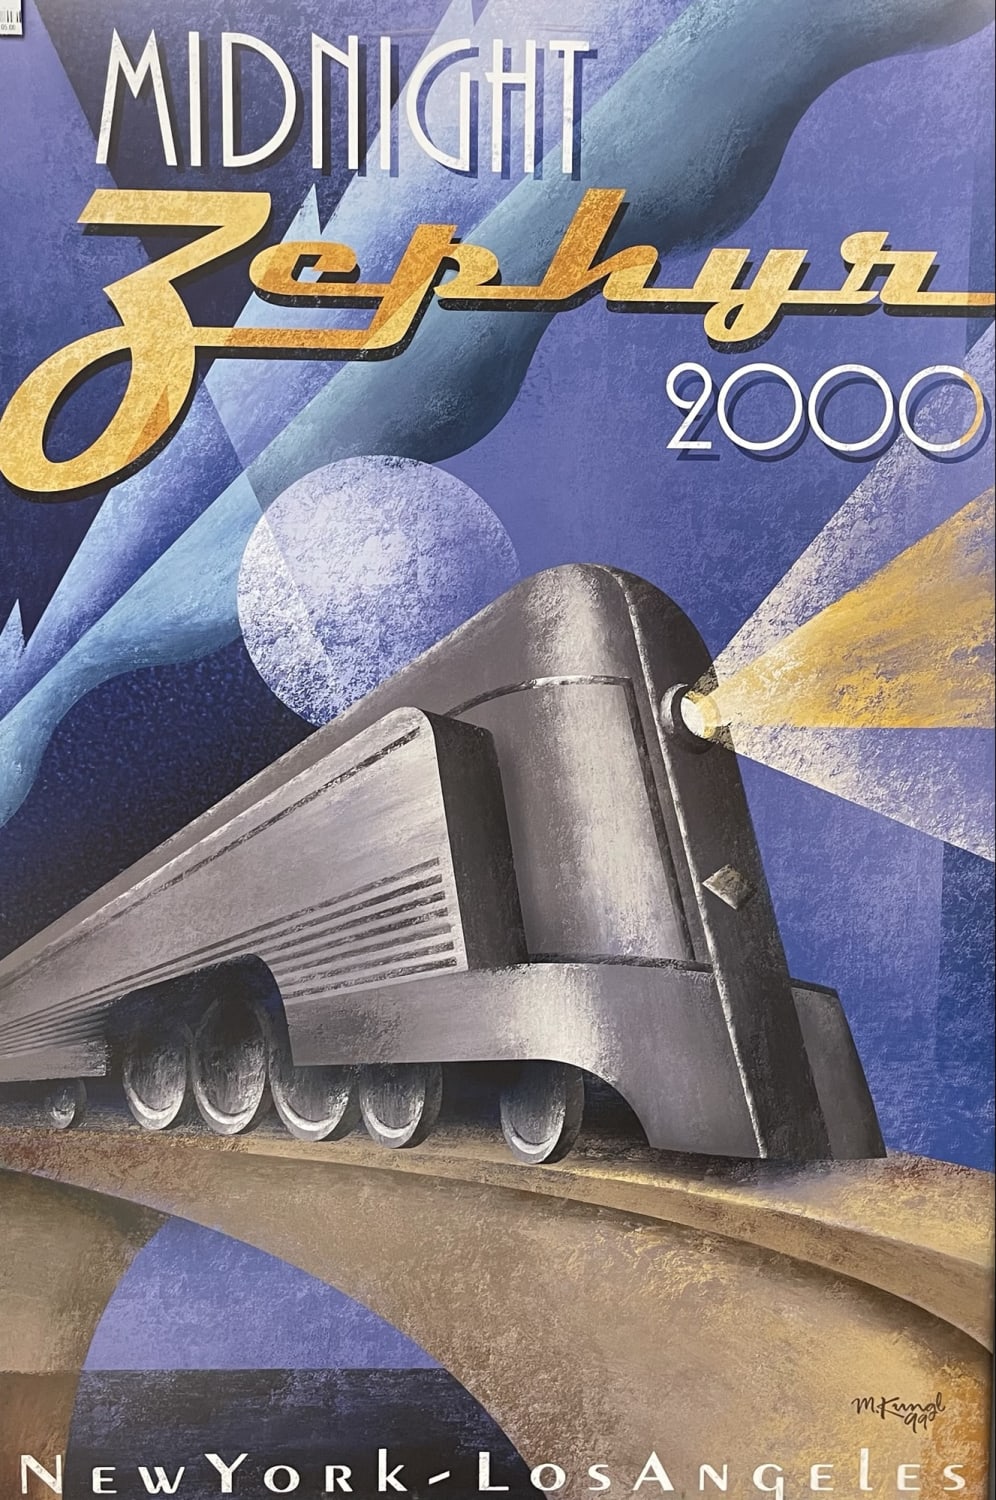 Found this in a vintage store, don’t know the year unfortunately. Art Deco, retro futurism